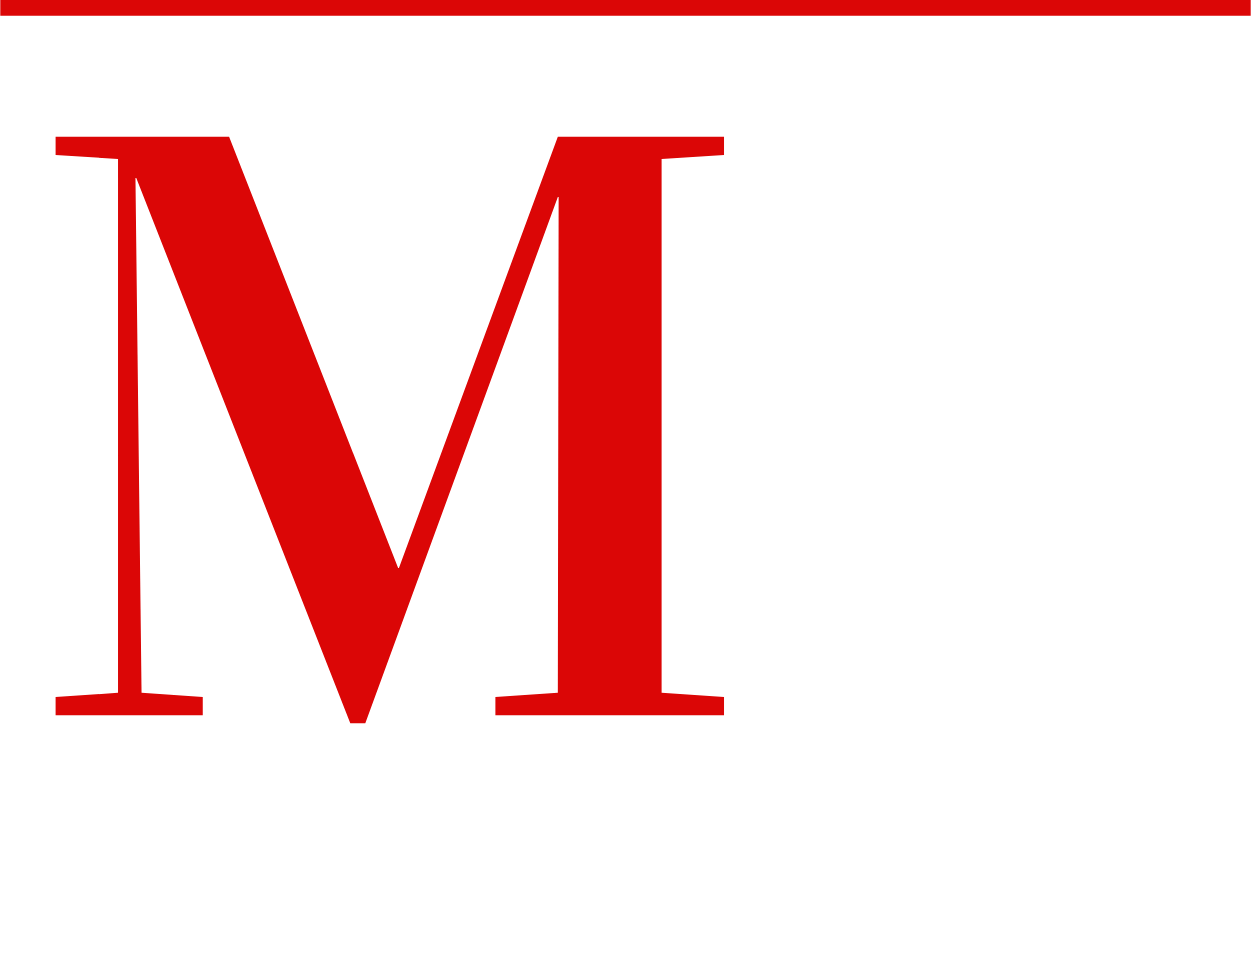 A green and white logo for the mortgage education institute.